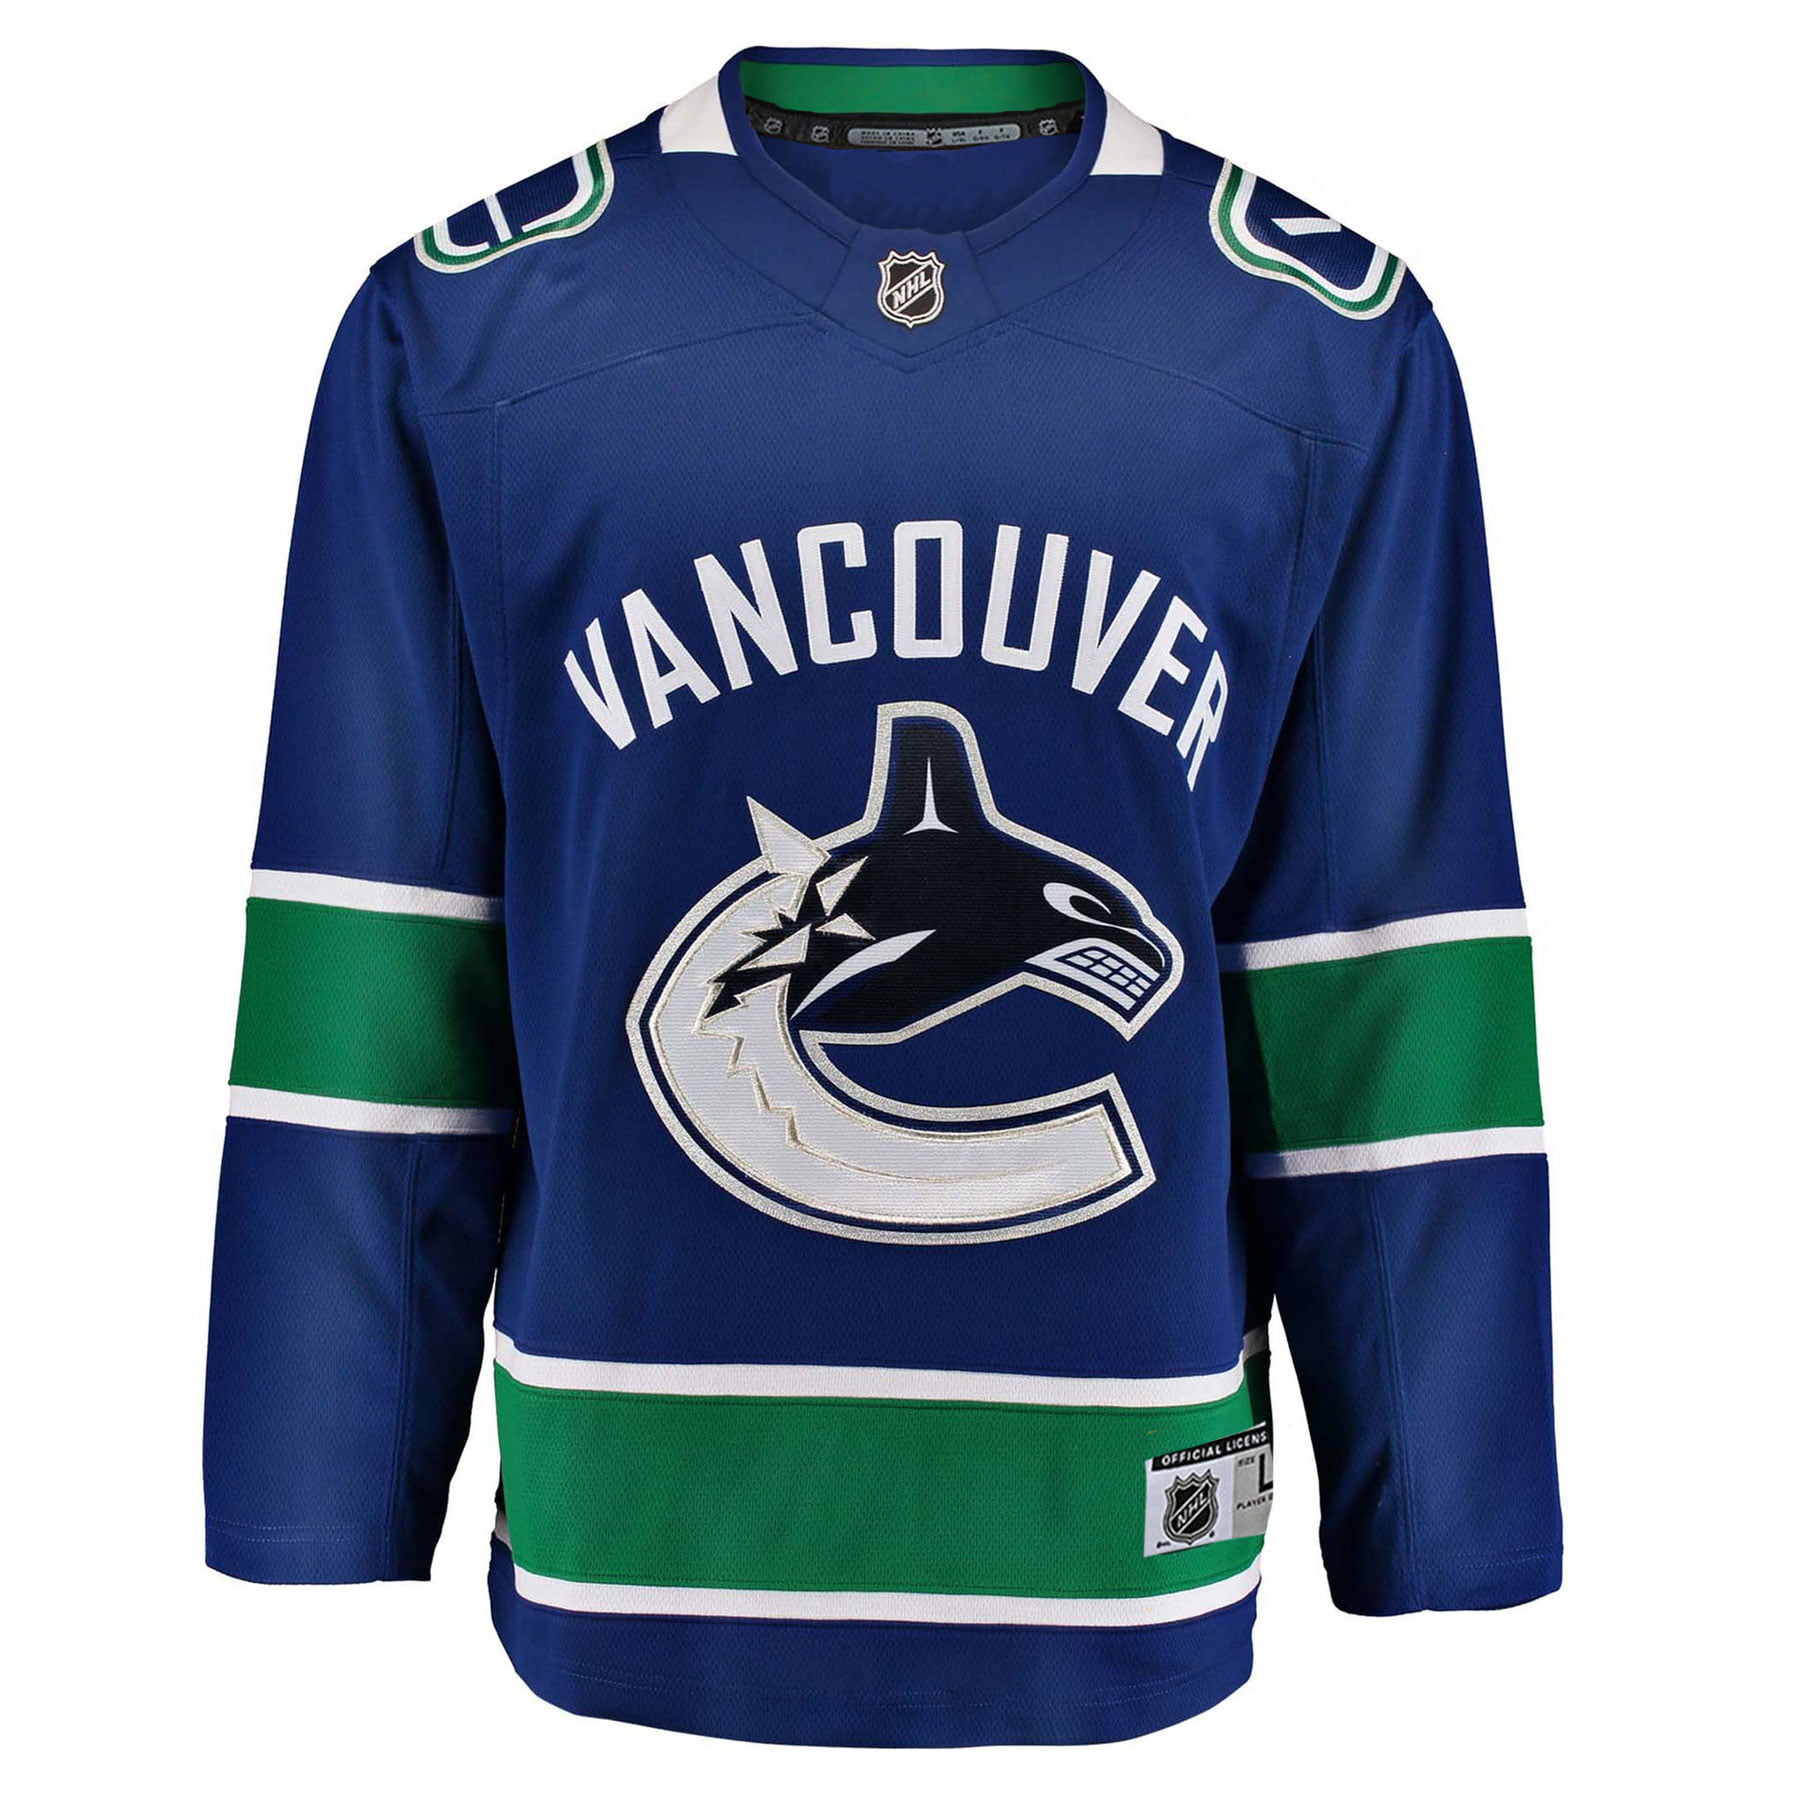 Vancouver Canucks NHL Premier Youth Replica Home Hockey Jersey